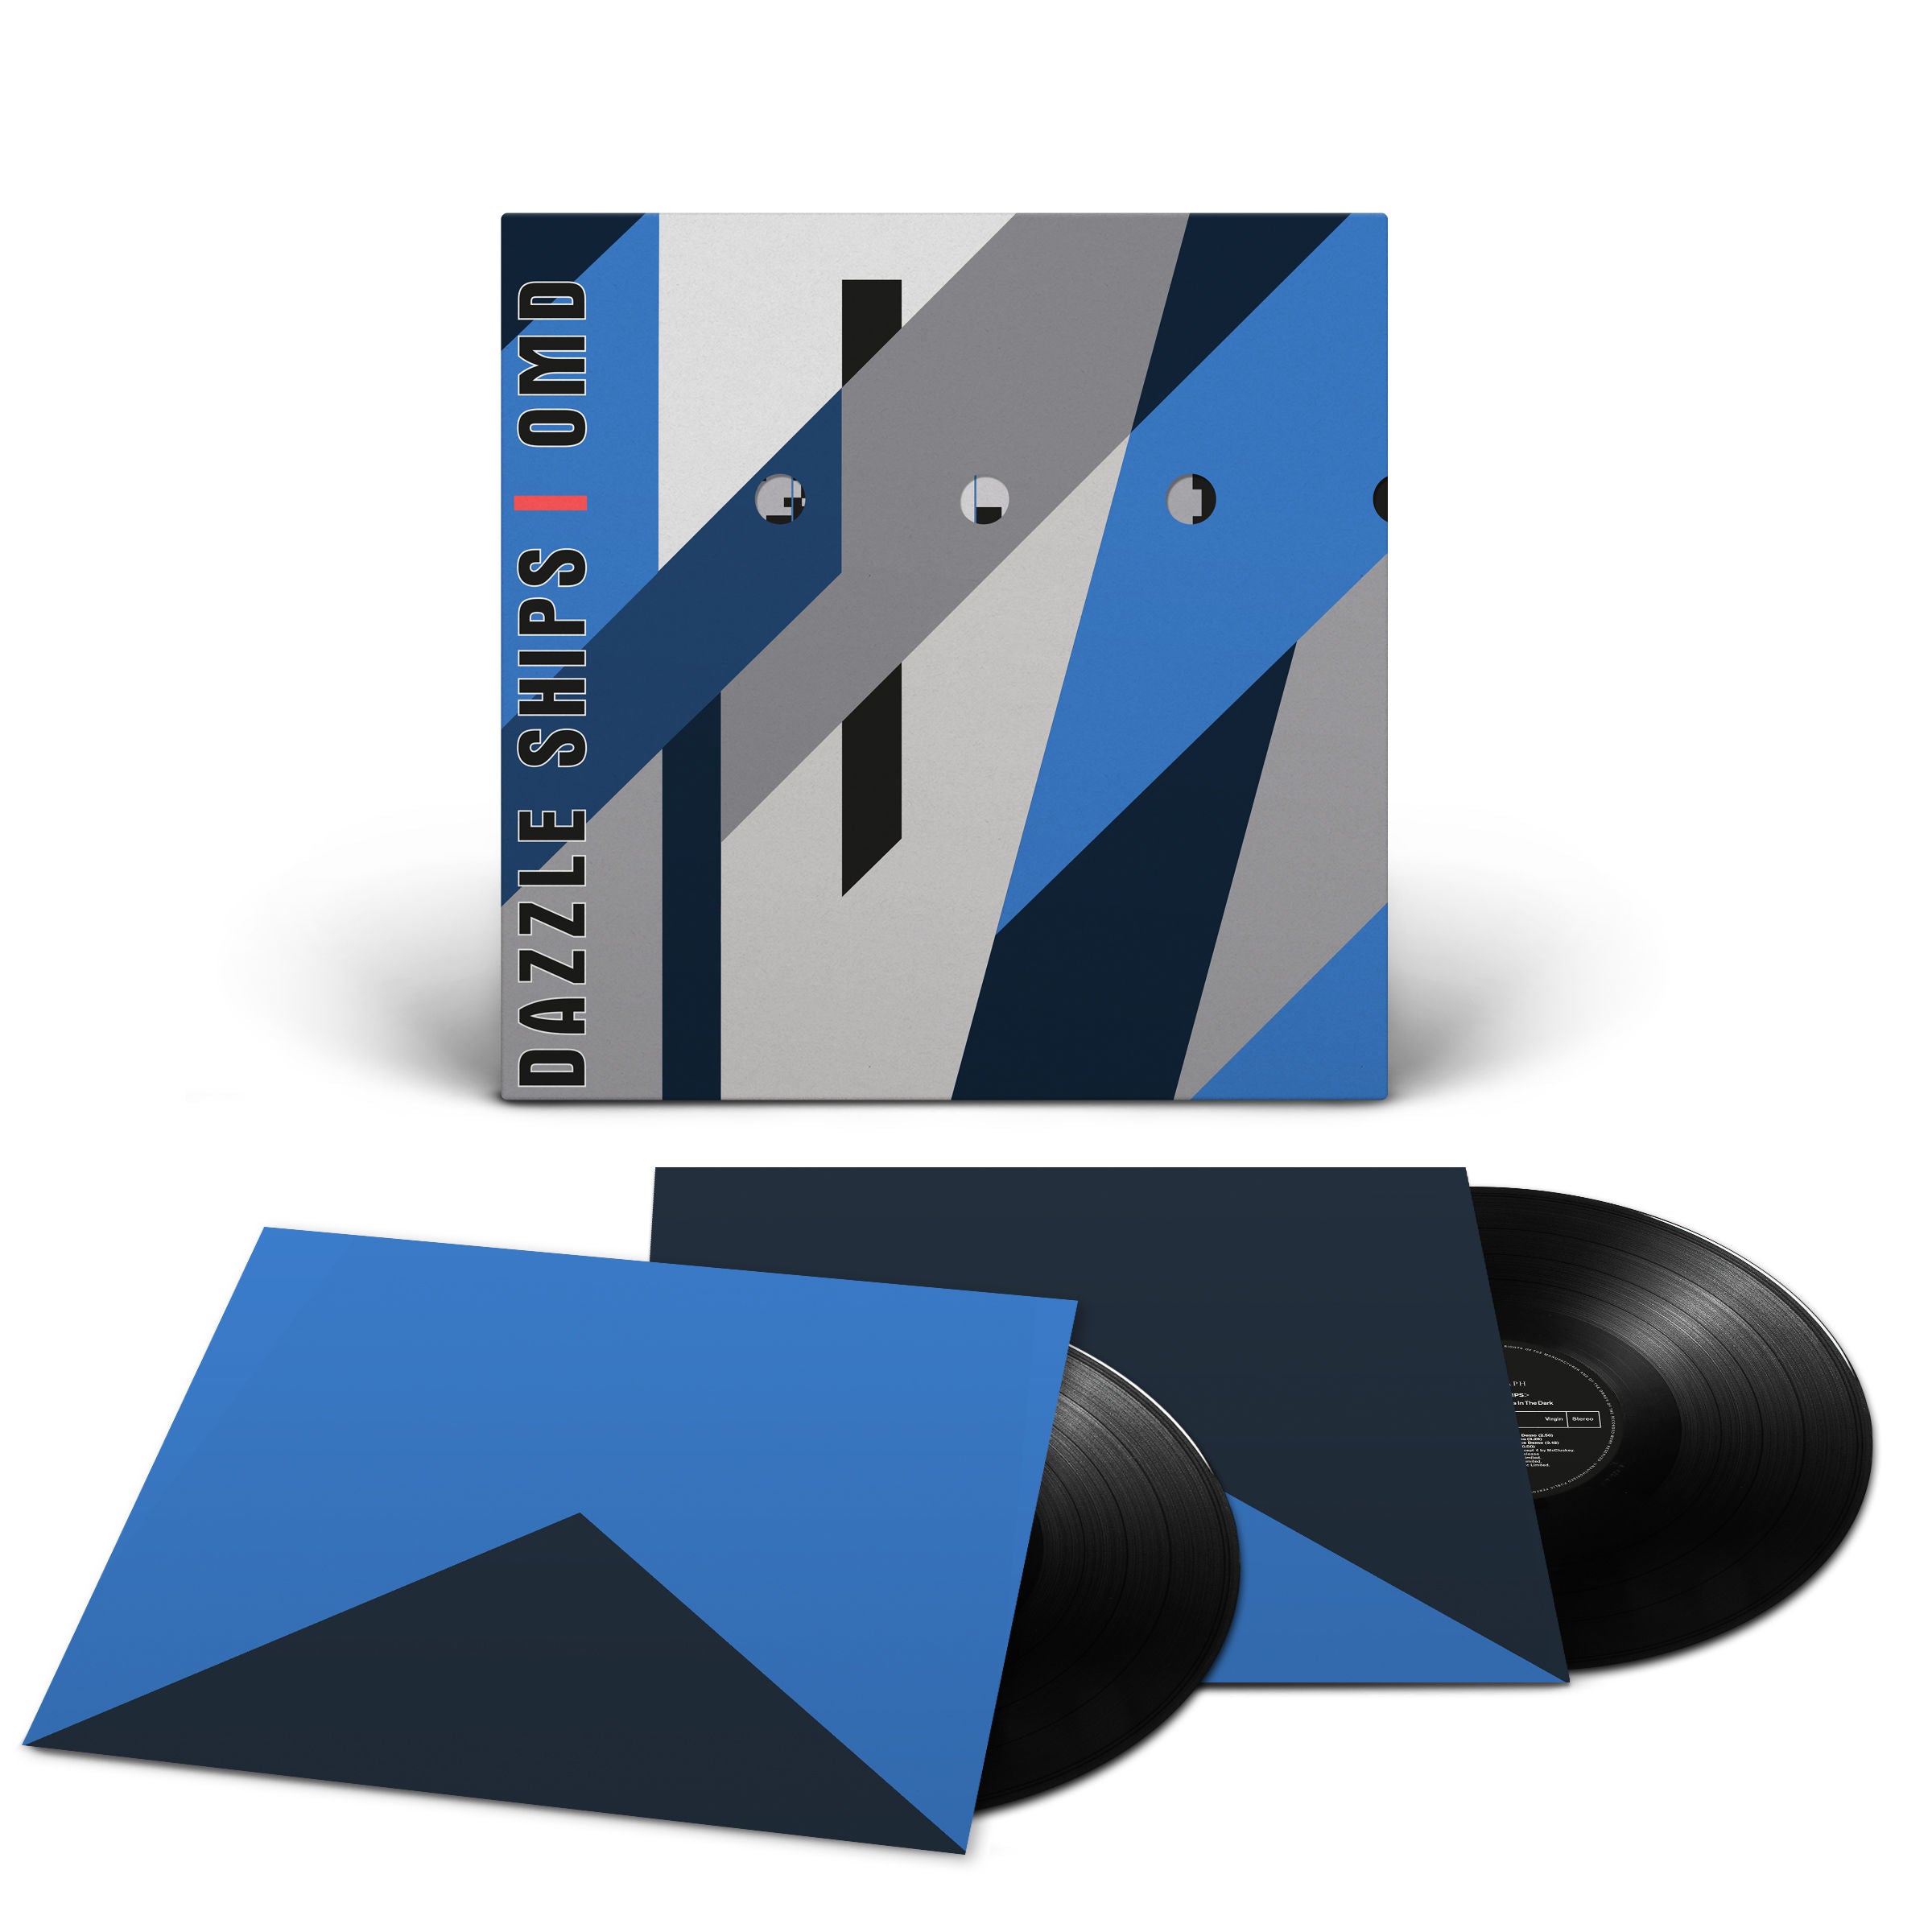 Orchestral Manoeuvres In The Dark - Dazzle Ships (40th Anniversary): Exclusive Vinyl 2LP